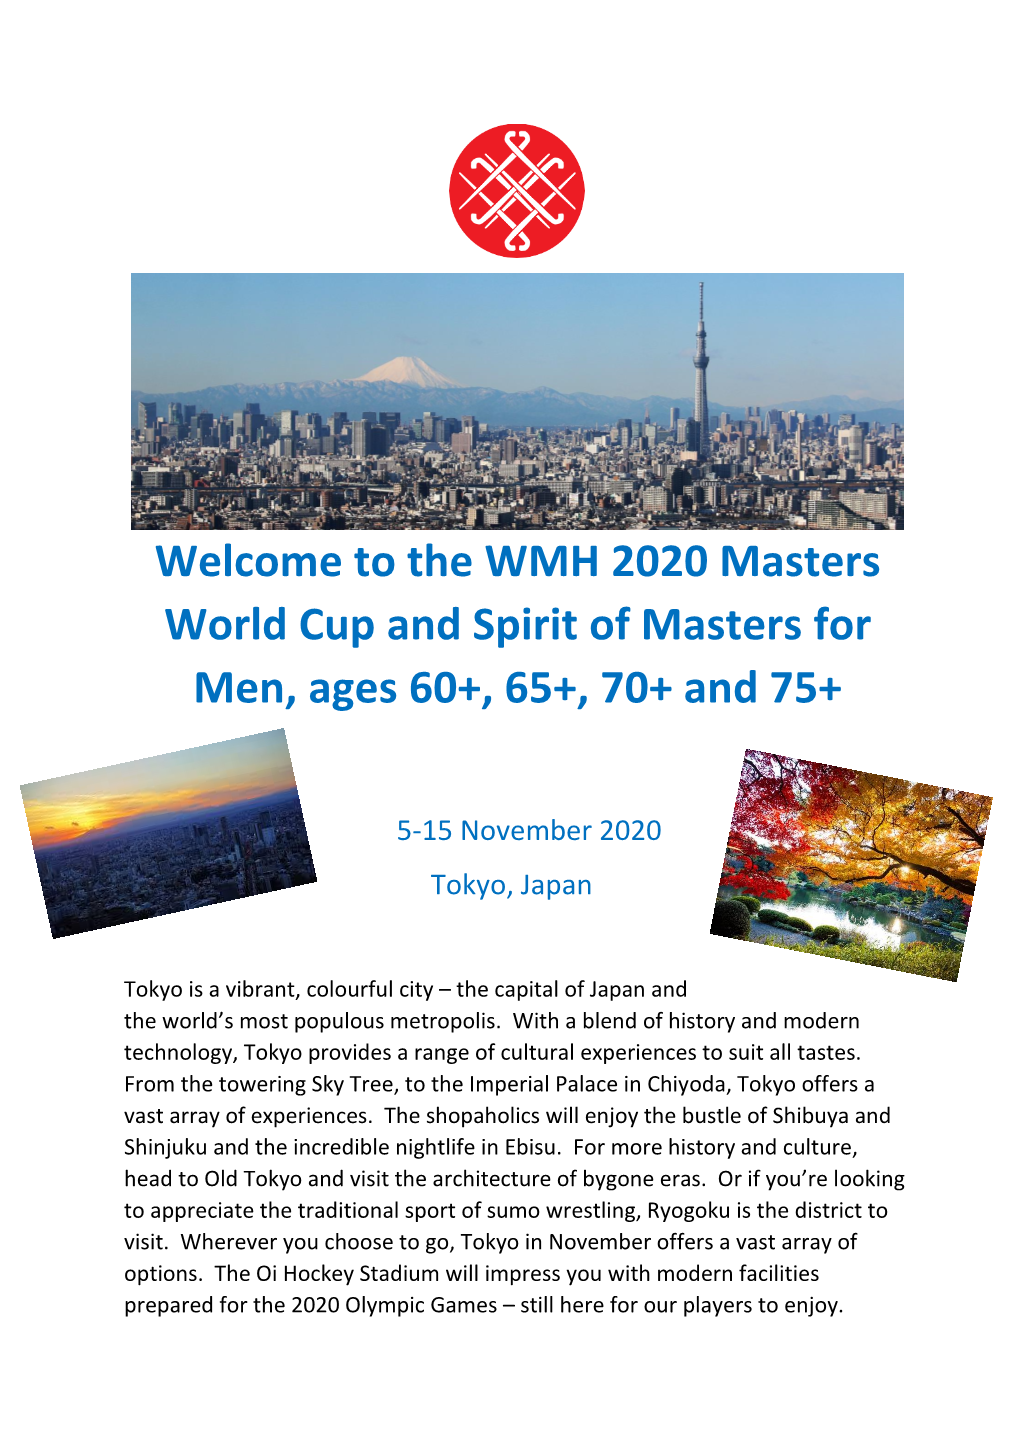 The WMH 2020 Masters World Cup and Spirit of Masters for Men, Ages 60+, 65+, 70+ and 75+